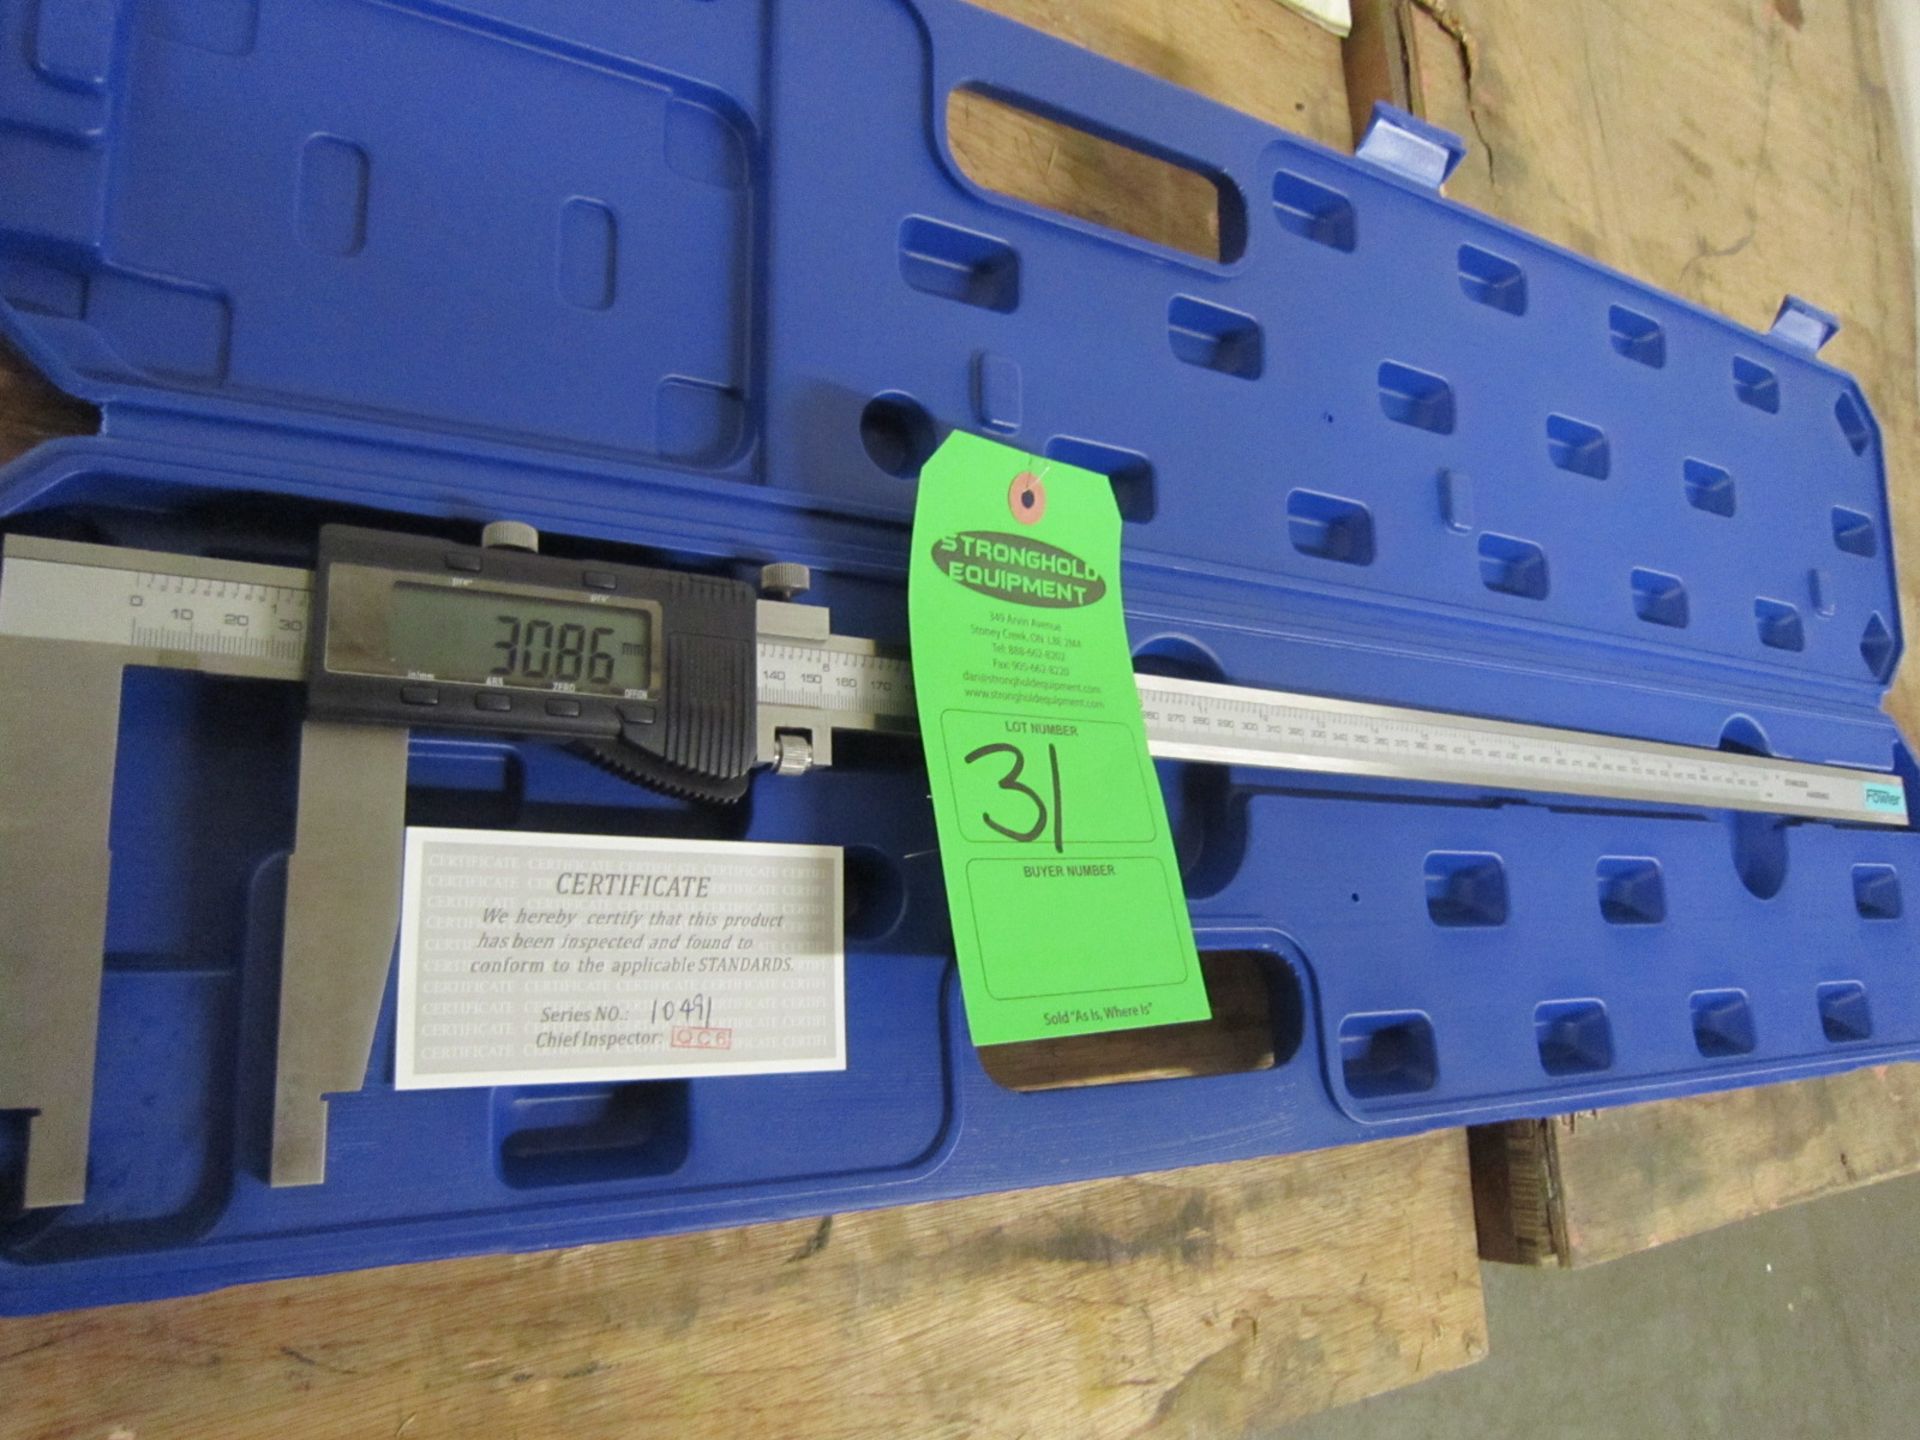 BRAND NEW Fowler 24" / 600mm Digital Caliper - large digital readout display in case - MINT - Image 2 of 2